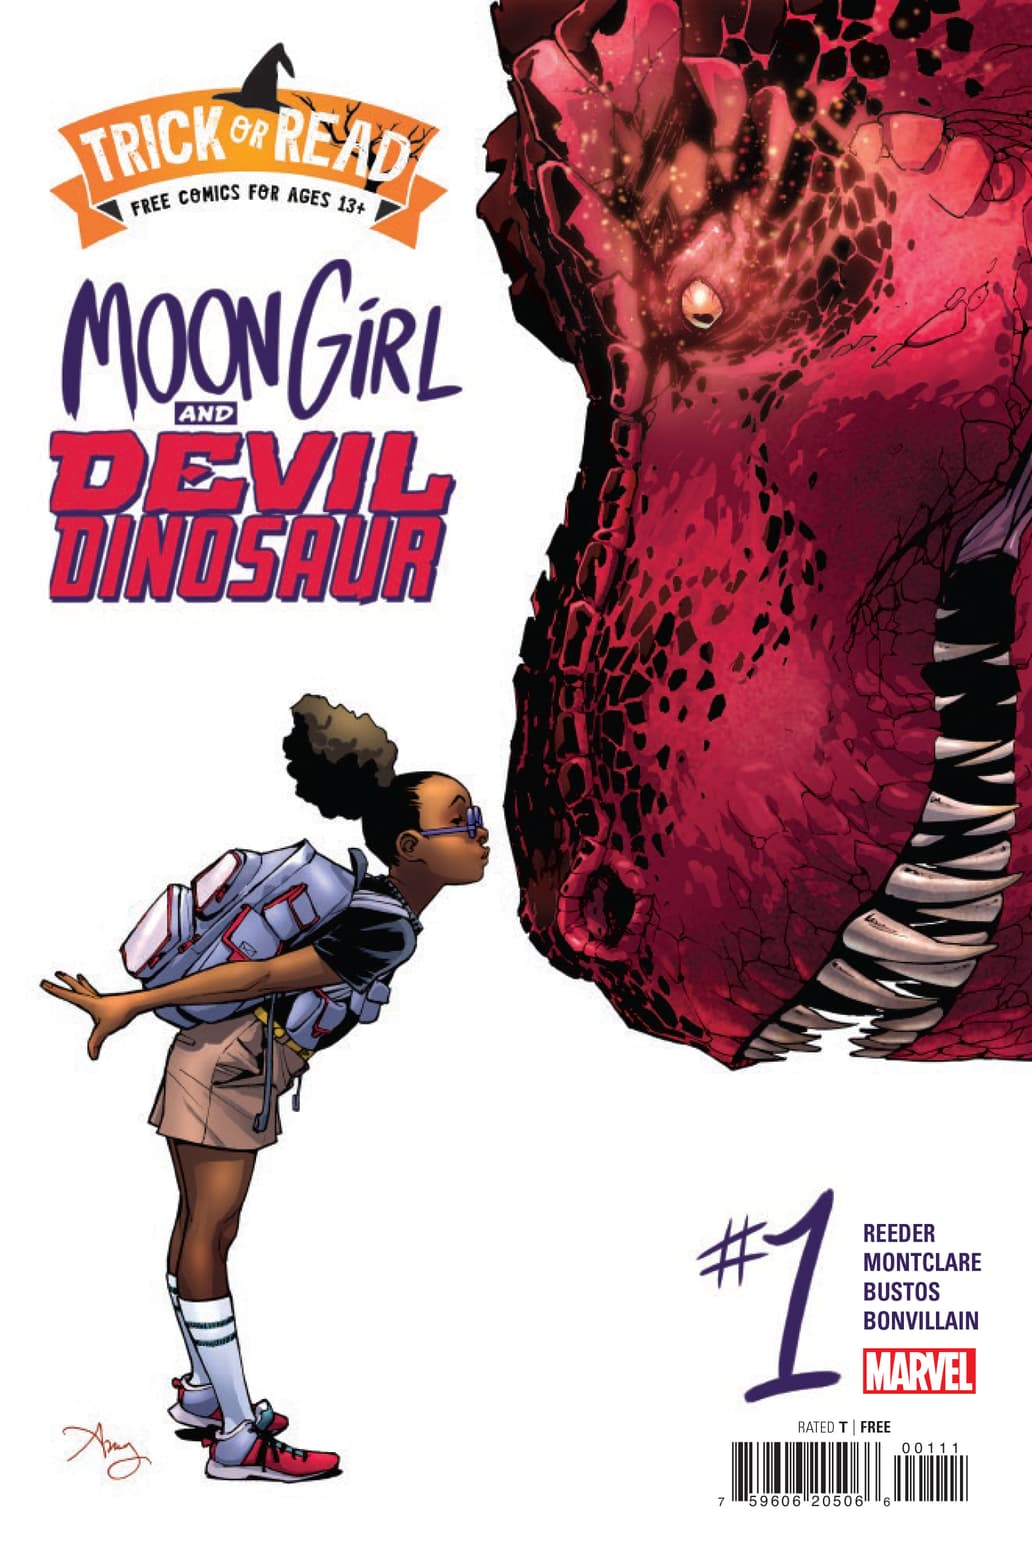 MOON GIRL AND DEVIL DINOSAUR #1 HALLOWEEN TRICK-OR-READ 2022 Cover by AMY REEDER